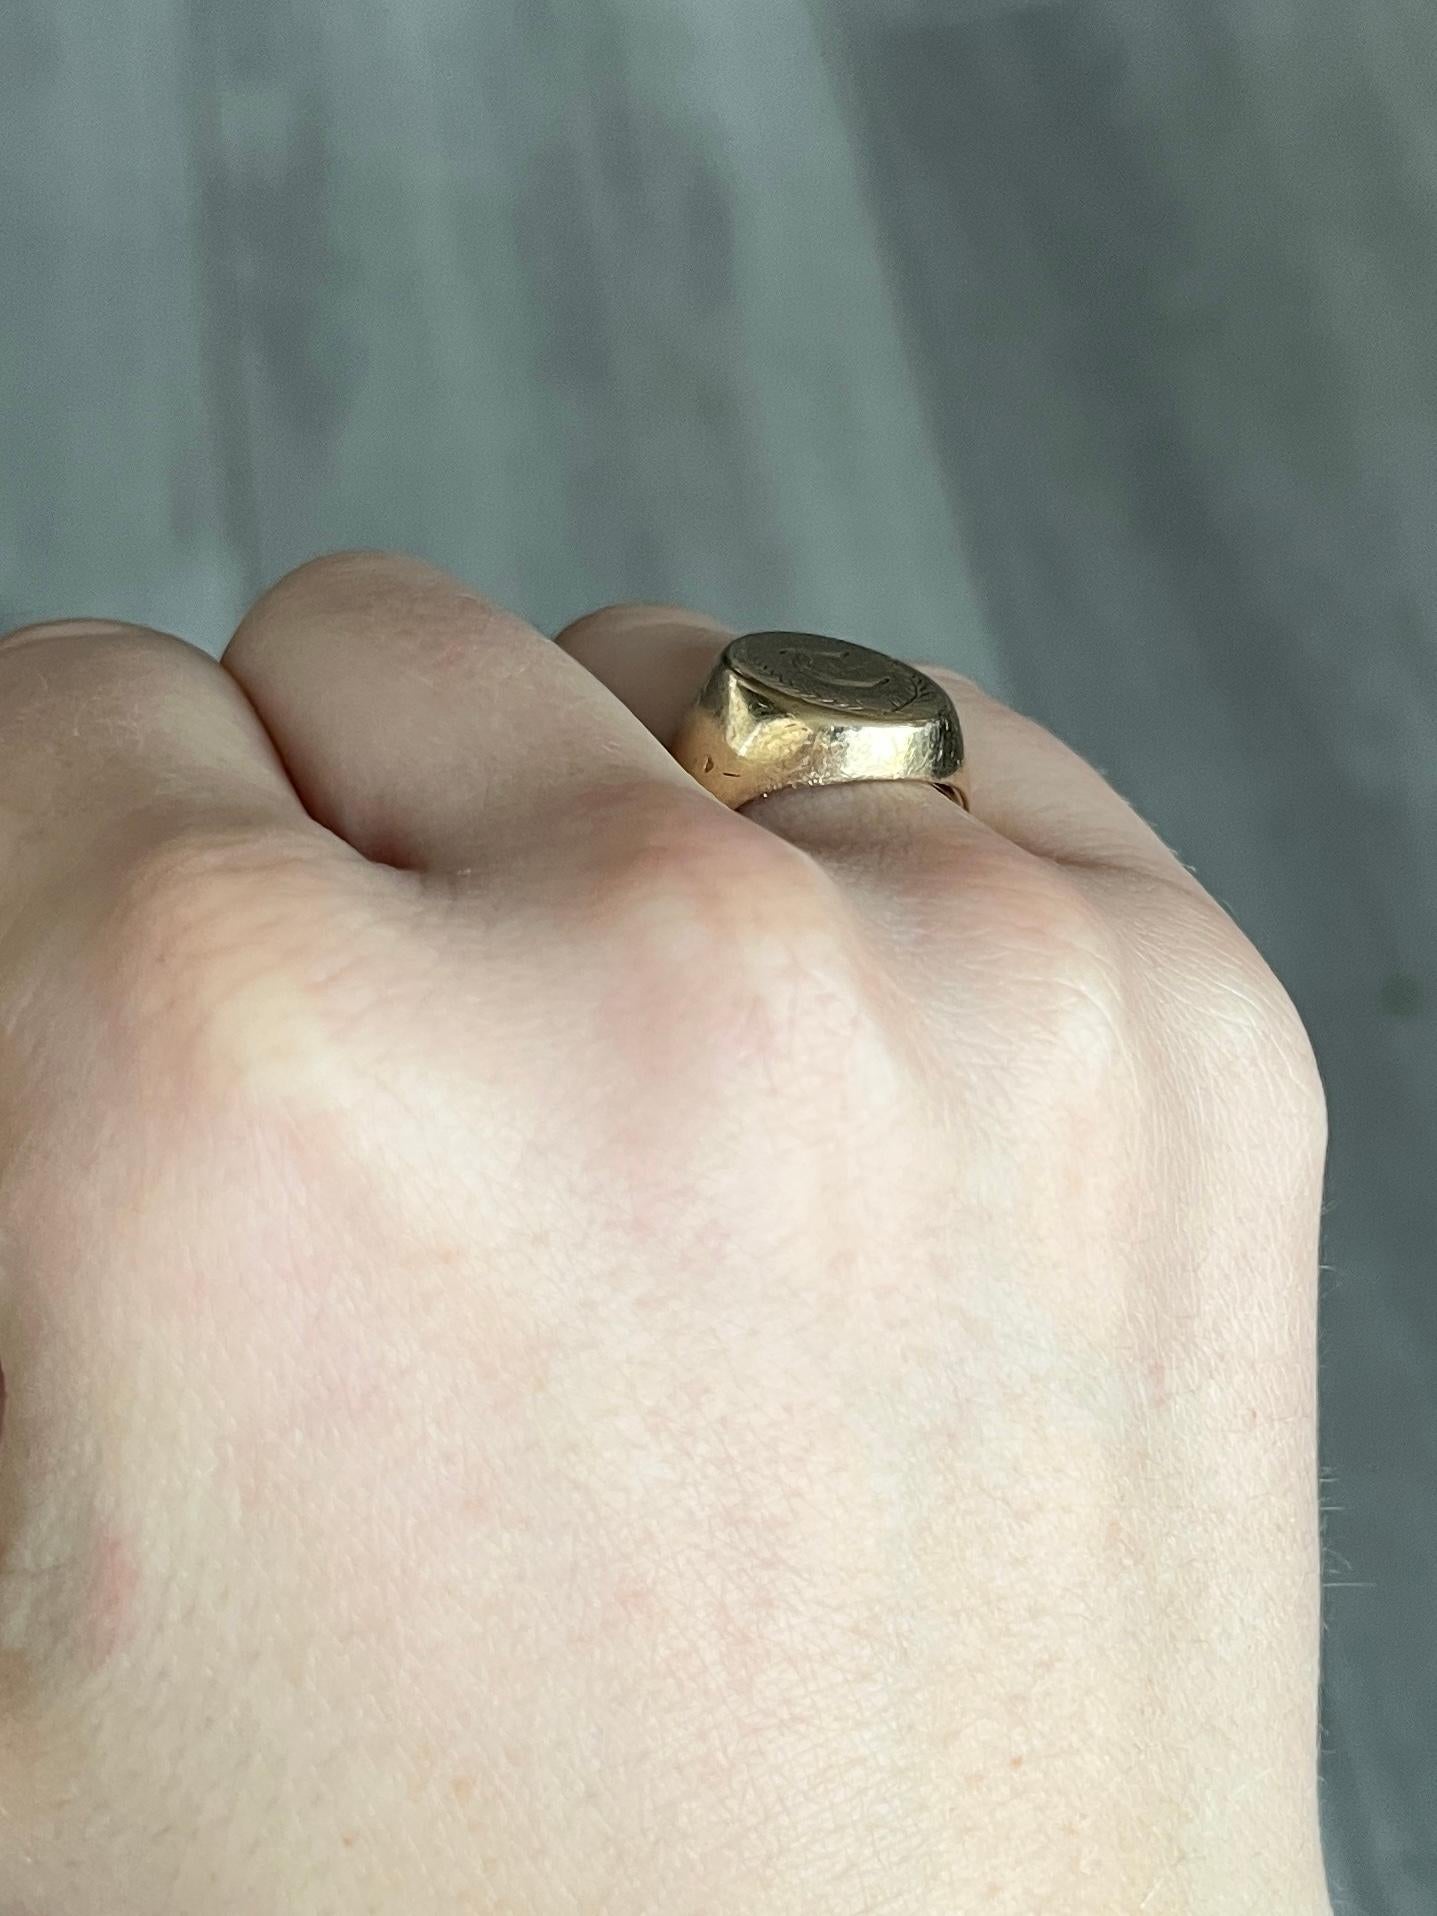 The main detail on this ring is the initial 'T' engraved into it.  The chunky ring is smooth and modelled in 9ct gold. Made in London 1975, England.

RIng Size: K 1/2 or 5 1/2 
Widest Part: 15mm 

Weight: 10.7g